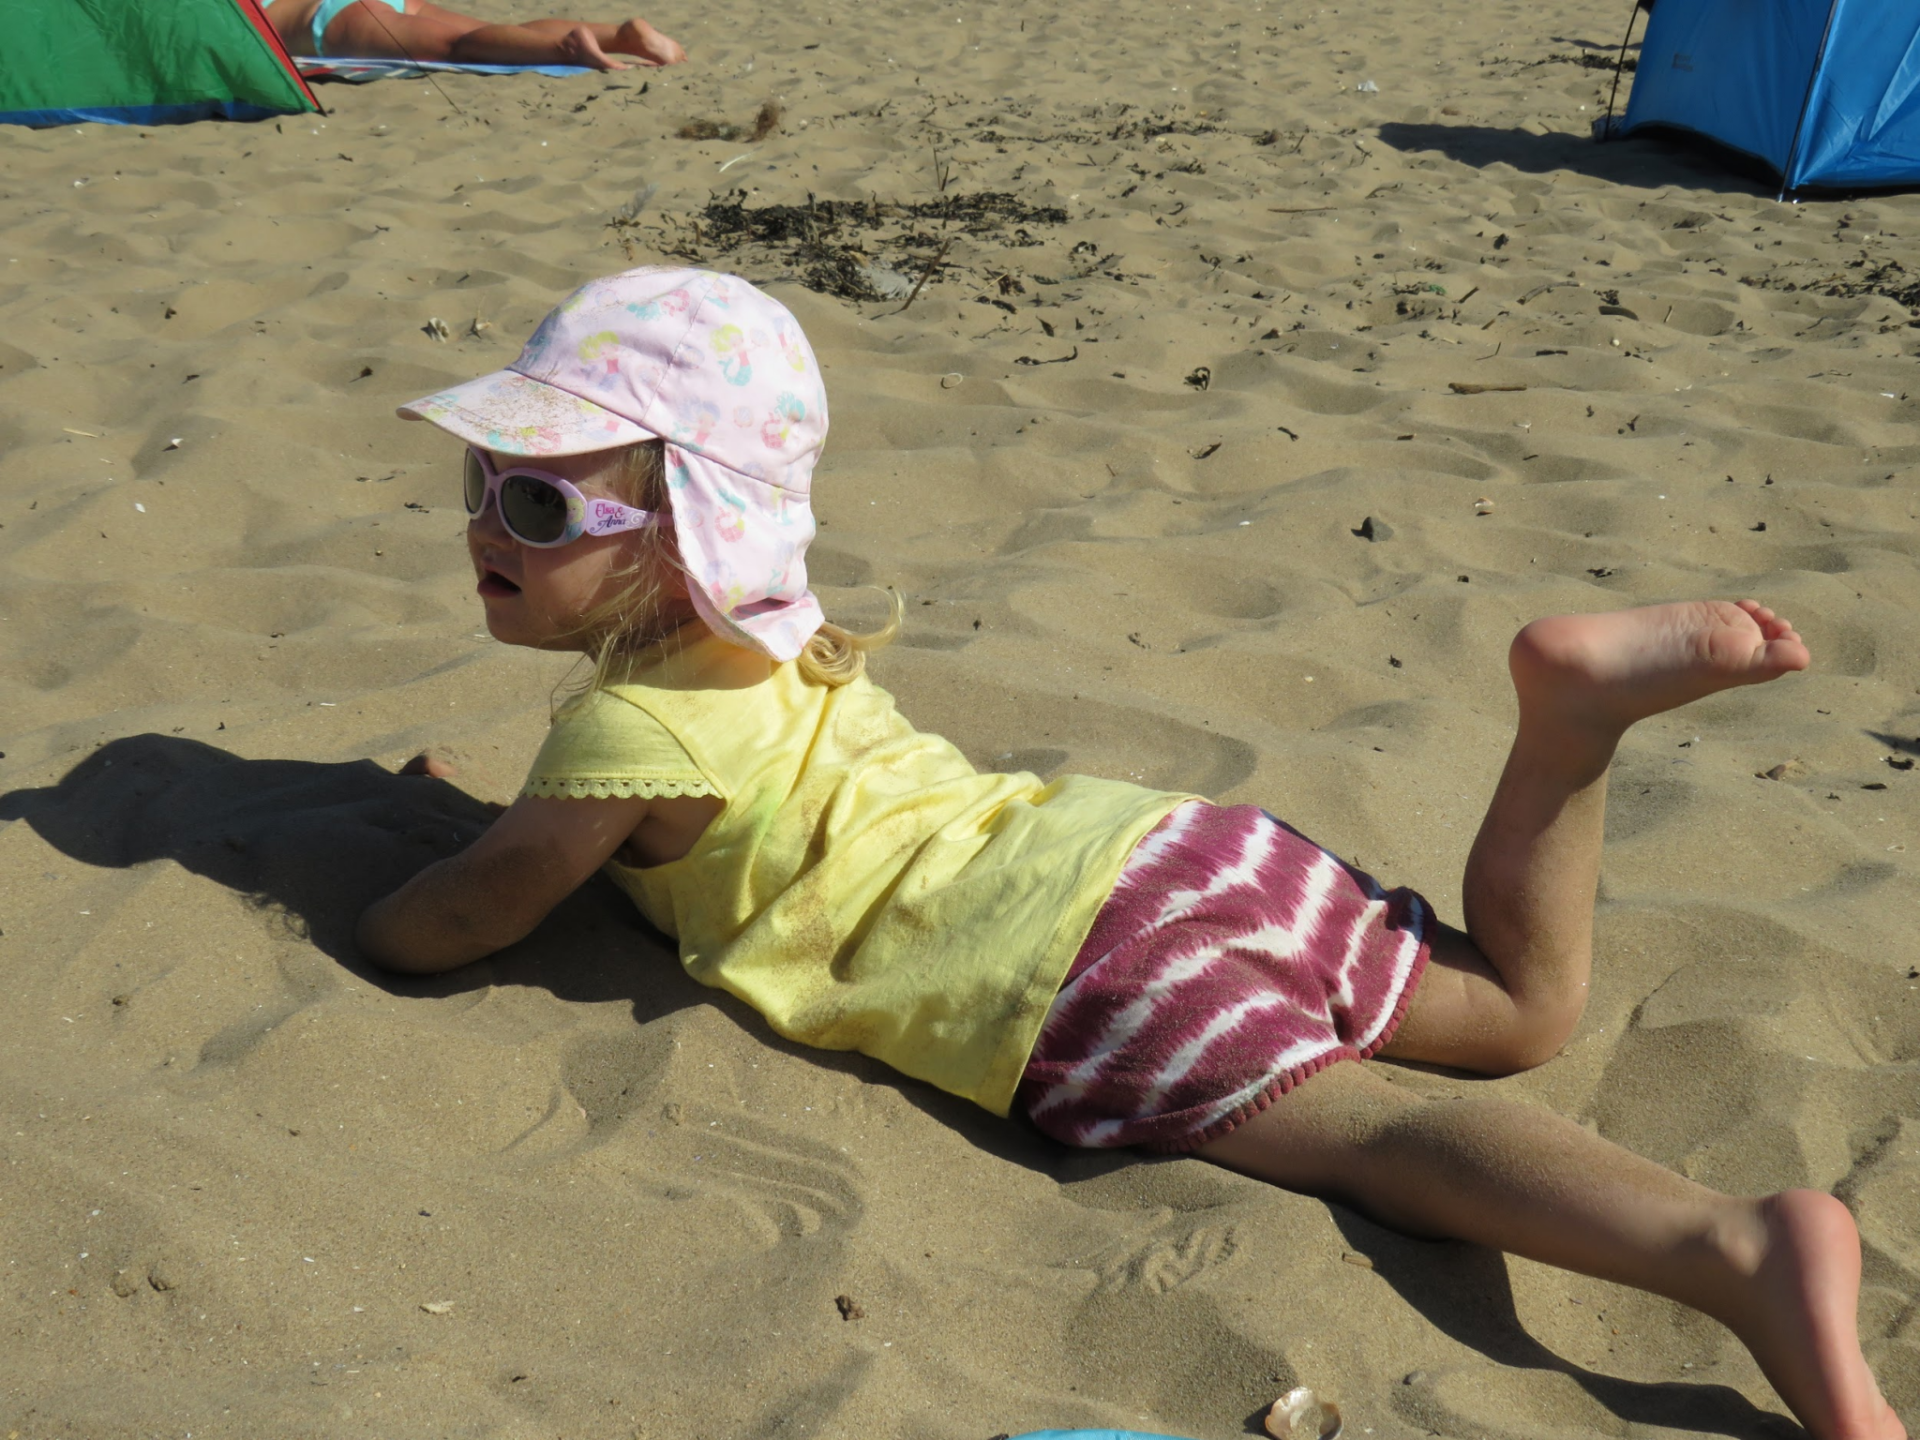 Ha yes you can cover me in suncream mum but then I'm going to make a sand angel and cake myself in sand!